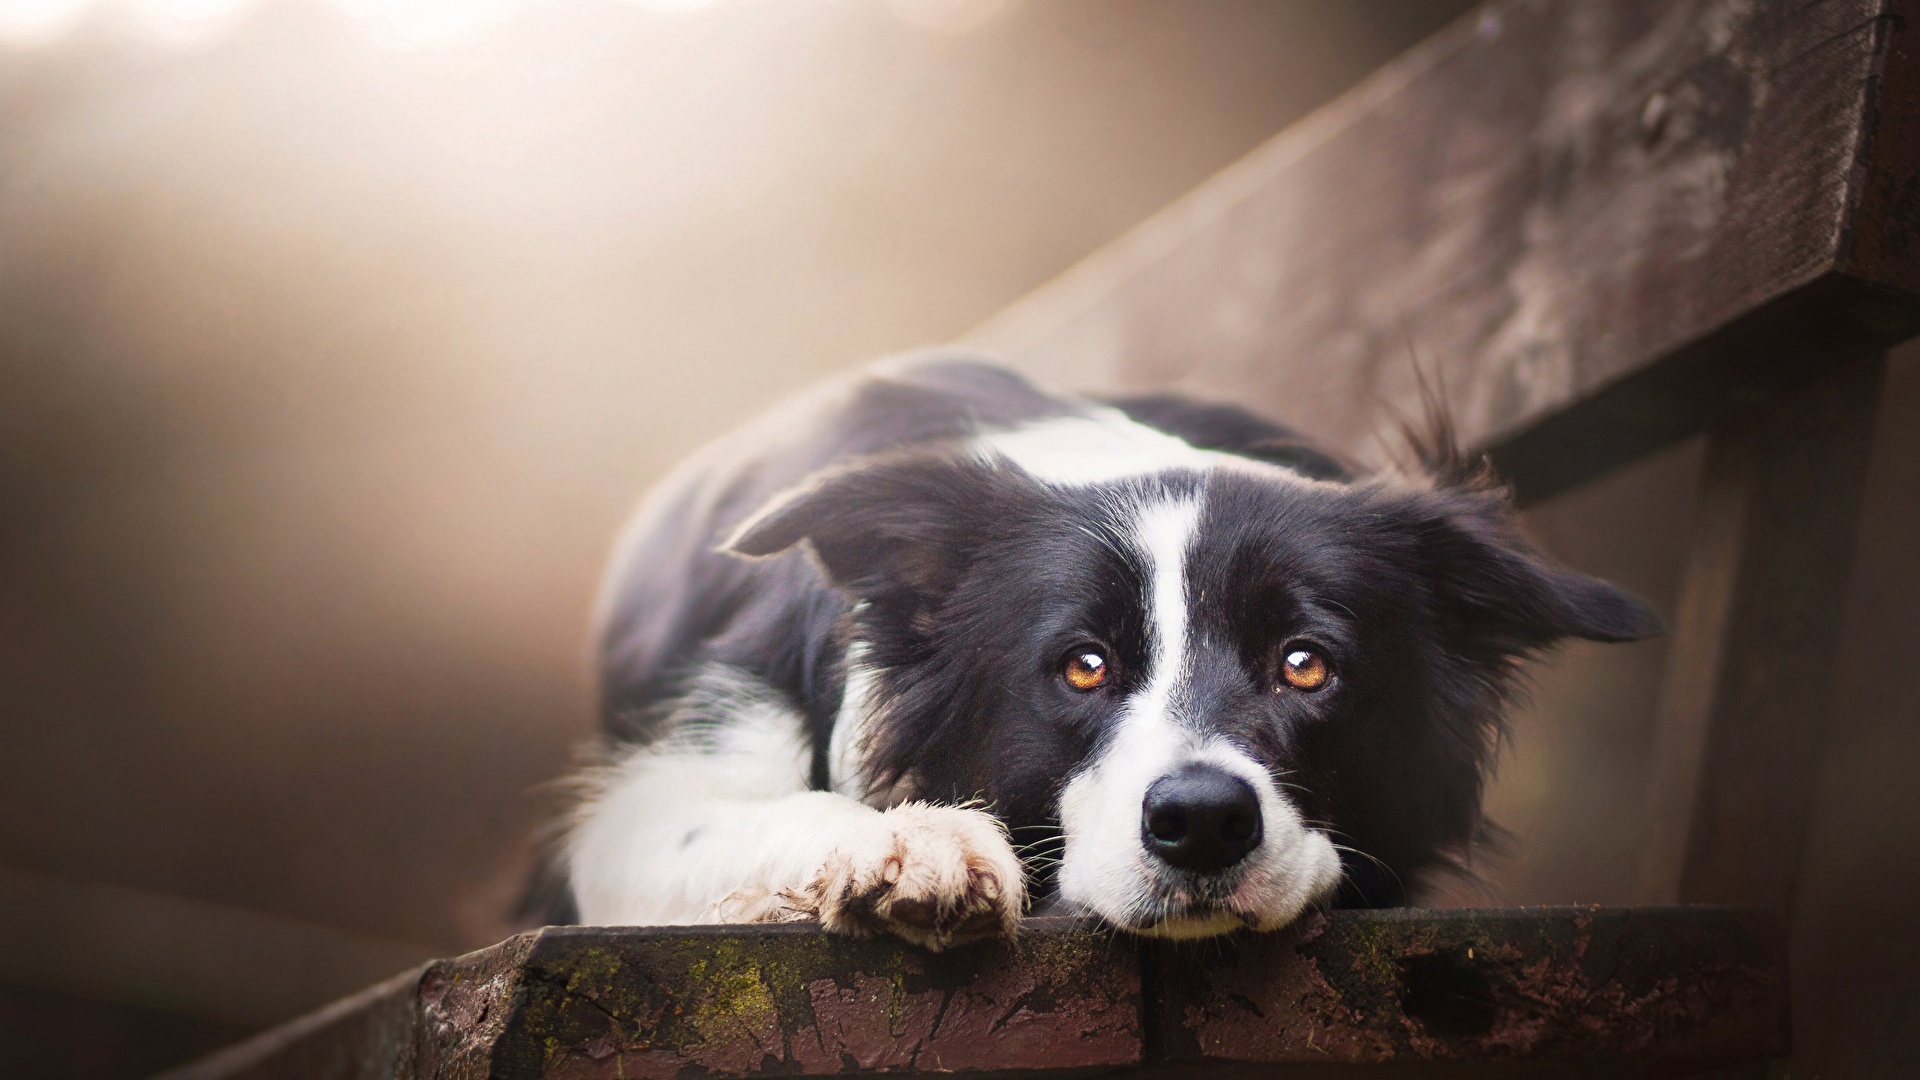 Photos Border Collie Dogs Sweet Beautiful Bench Glance